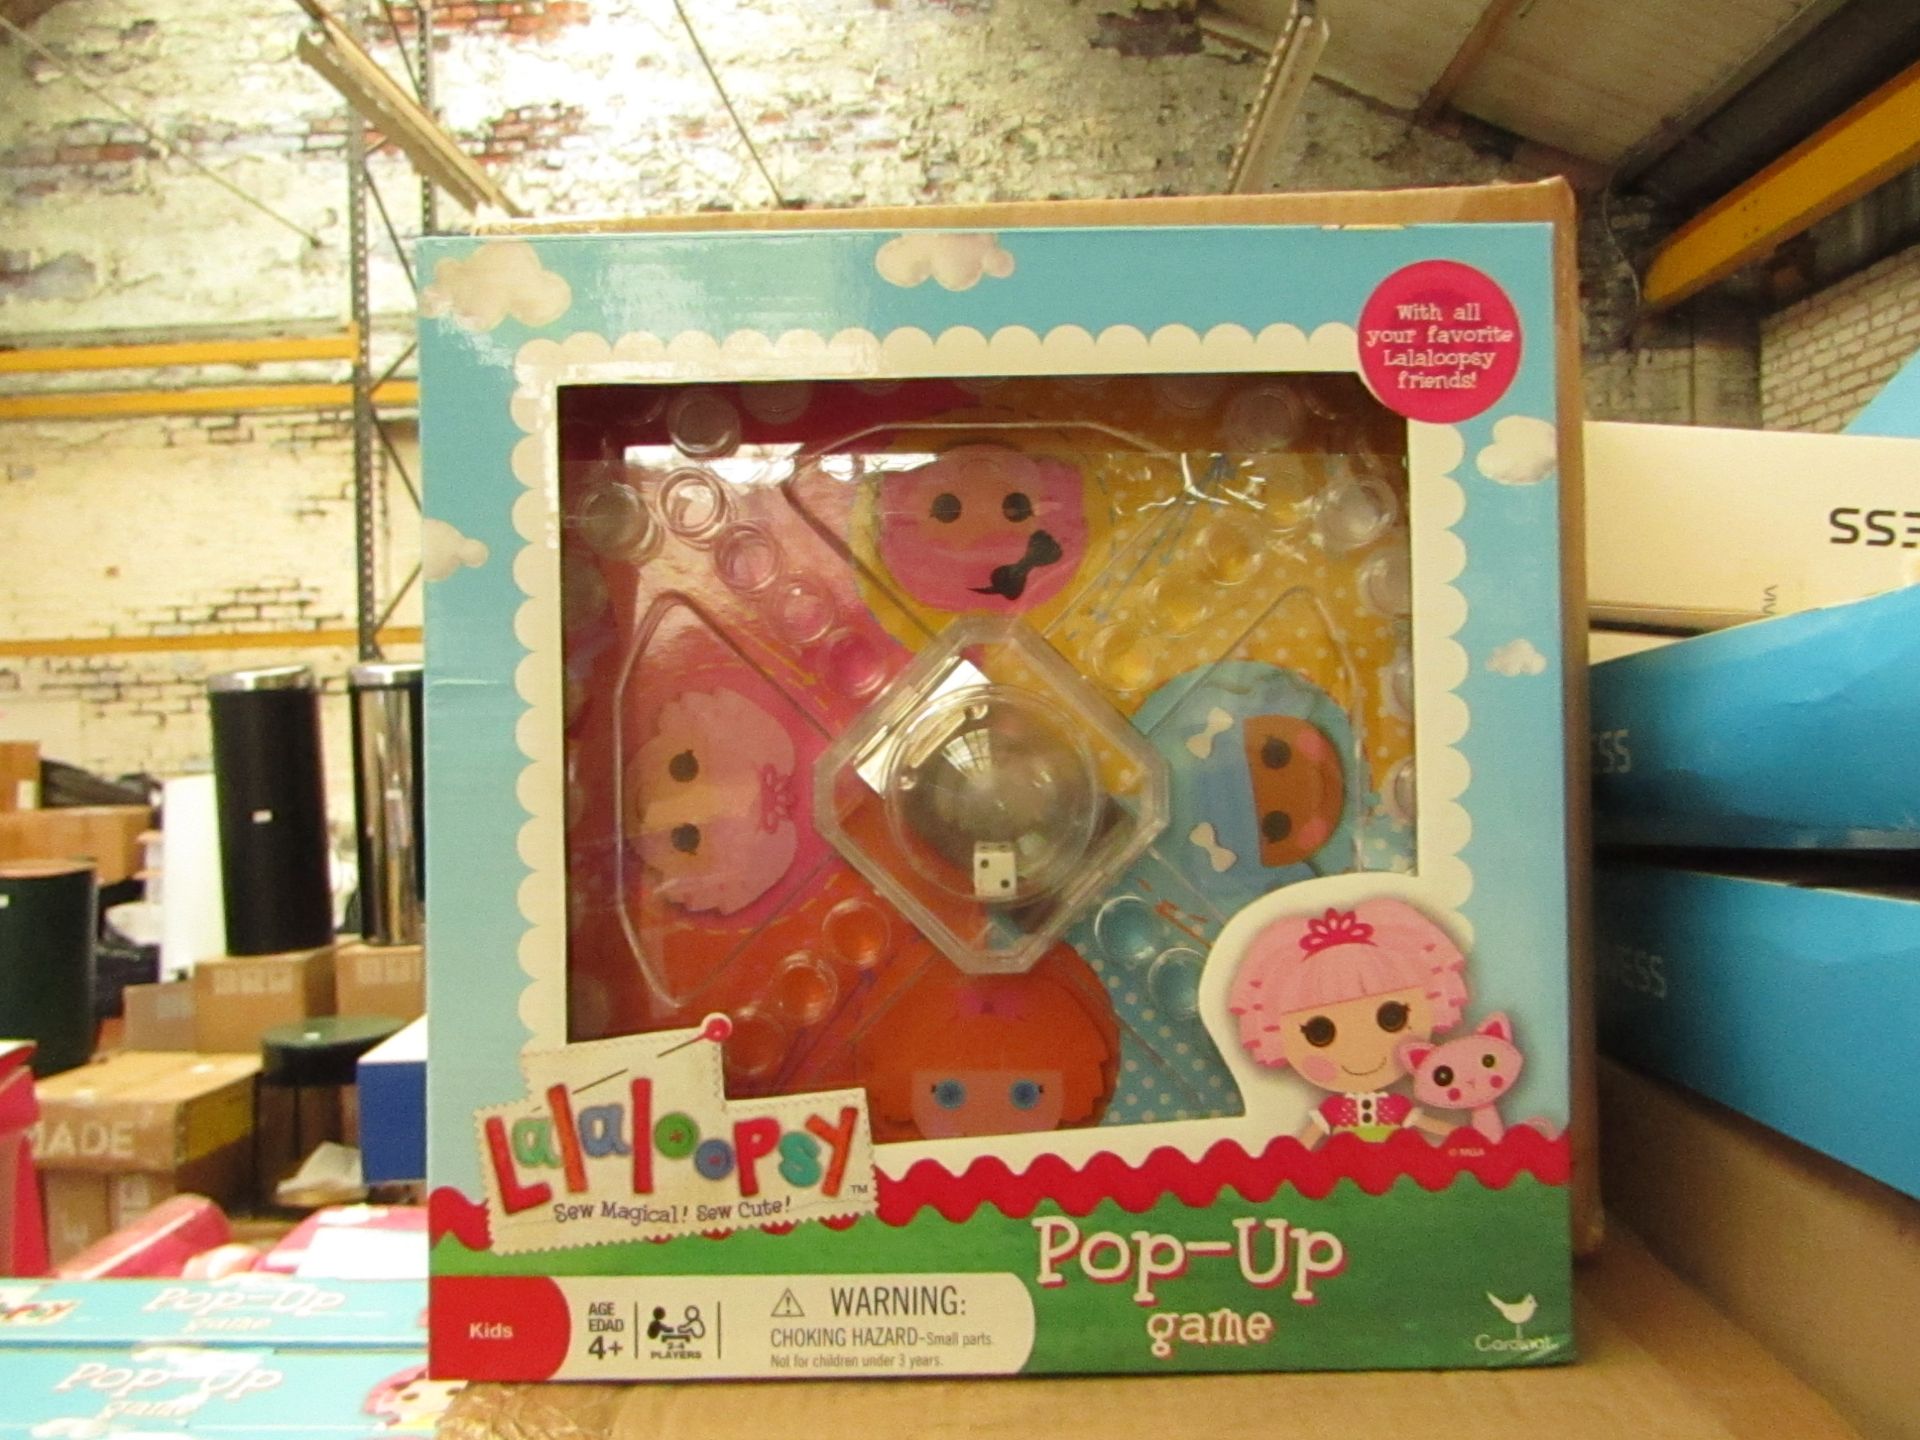 2 x Lalaloopsy Pop Up Game RRP £12.99 Each on Ebay - New & Packaged